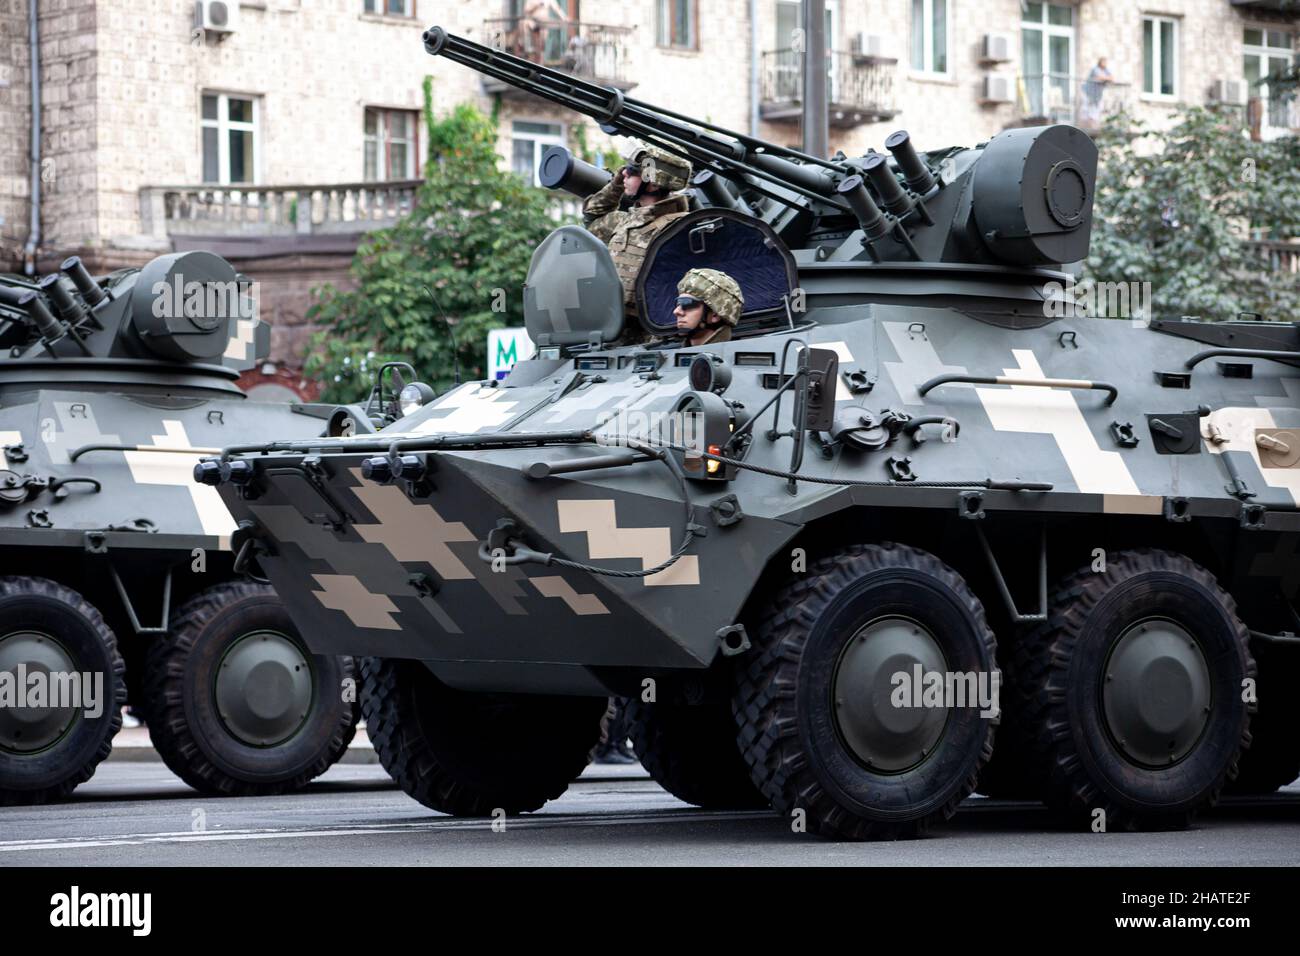 Ukraine, Kyiv - August 18, 2021: Tankman. Military parade. Armored vehicle. Transport in protective colors. Army vehicles SUVs Stock Photo